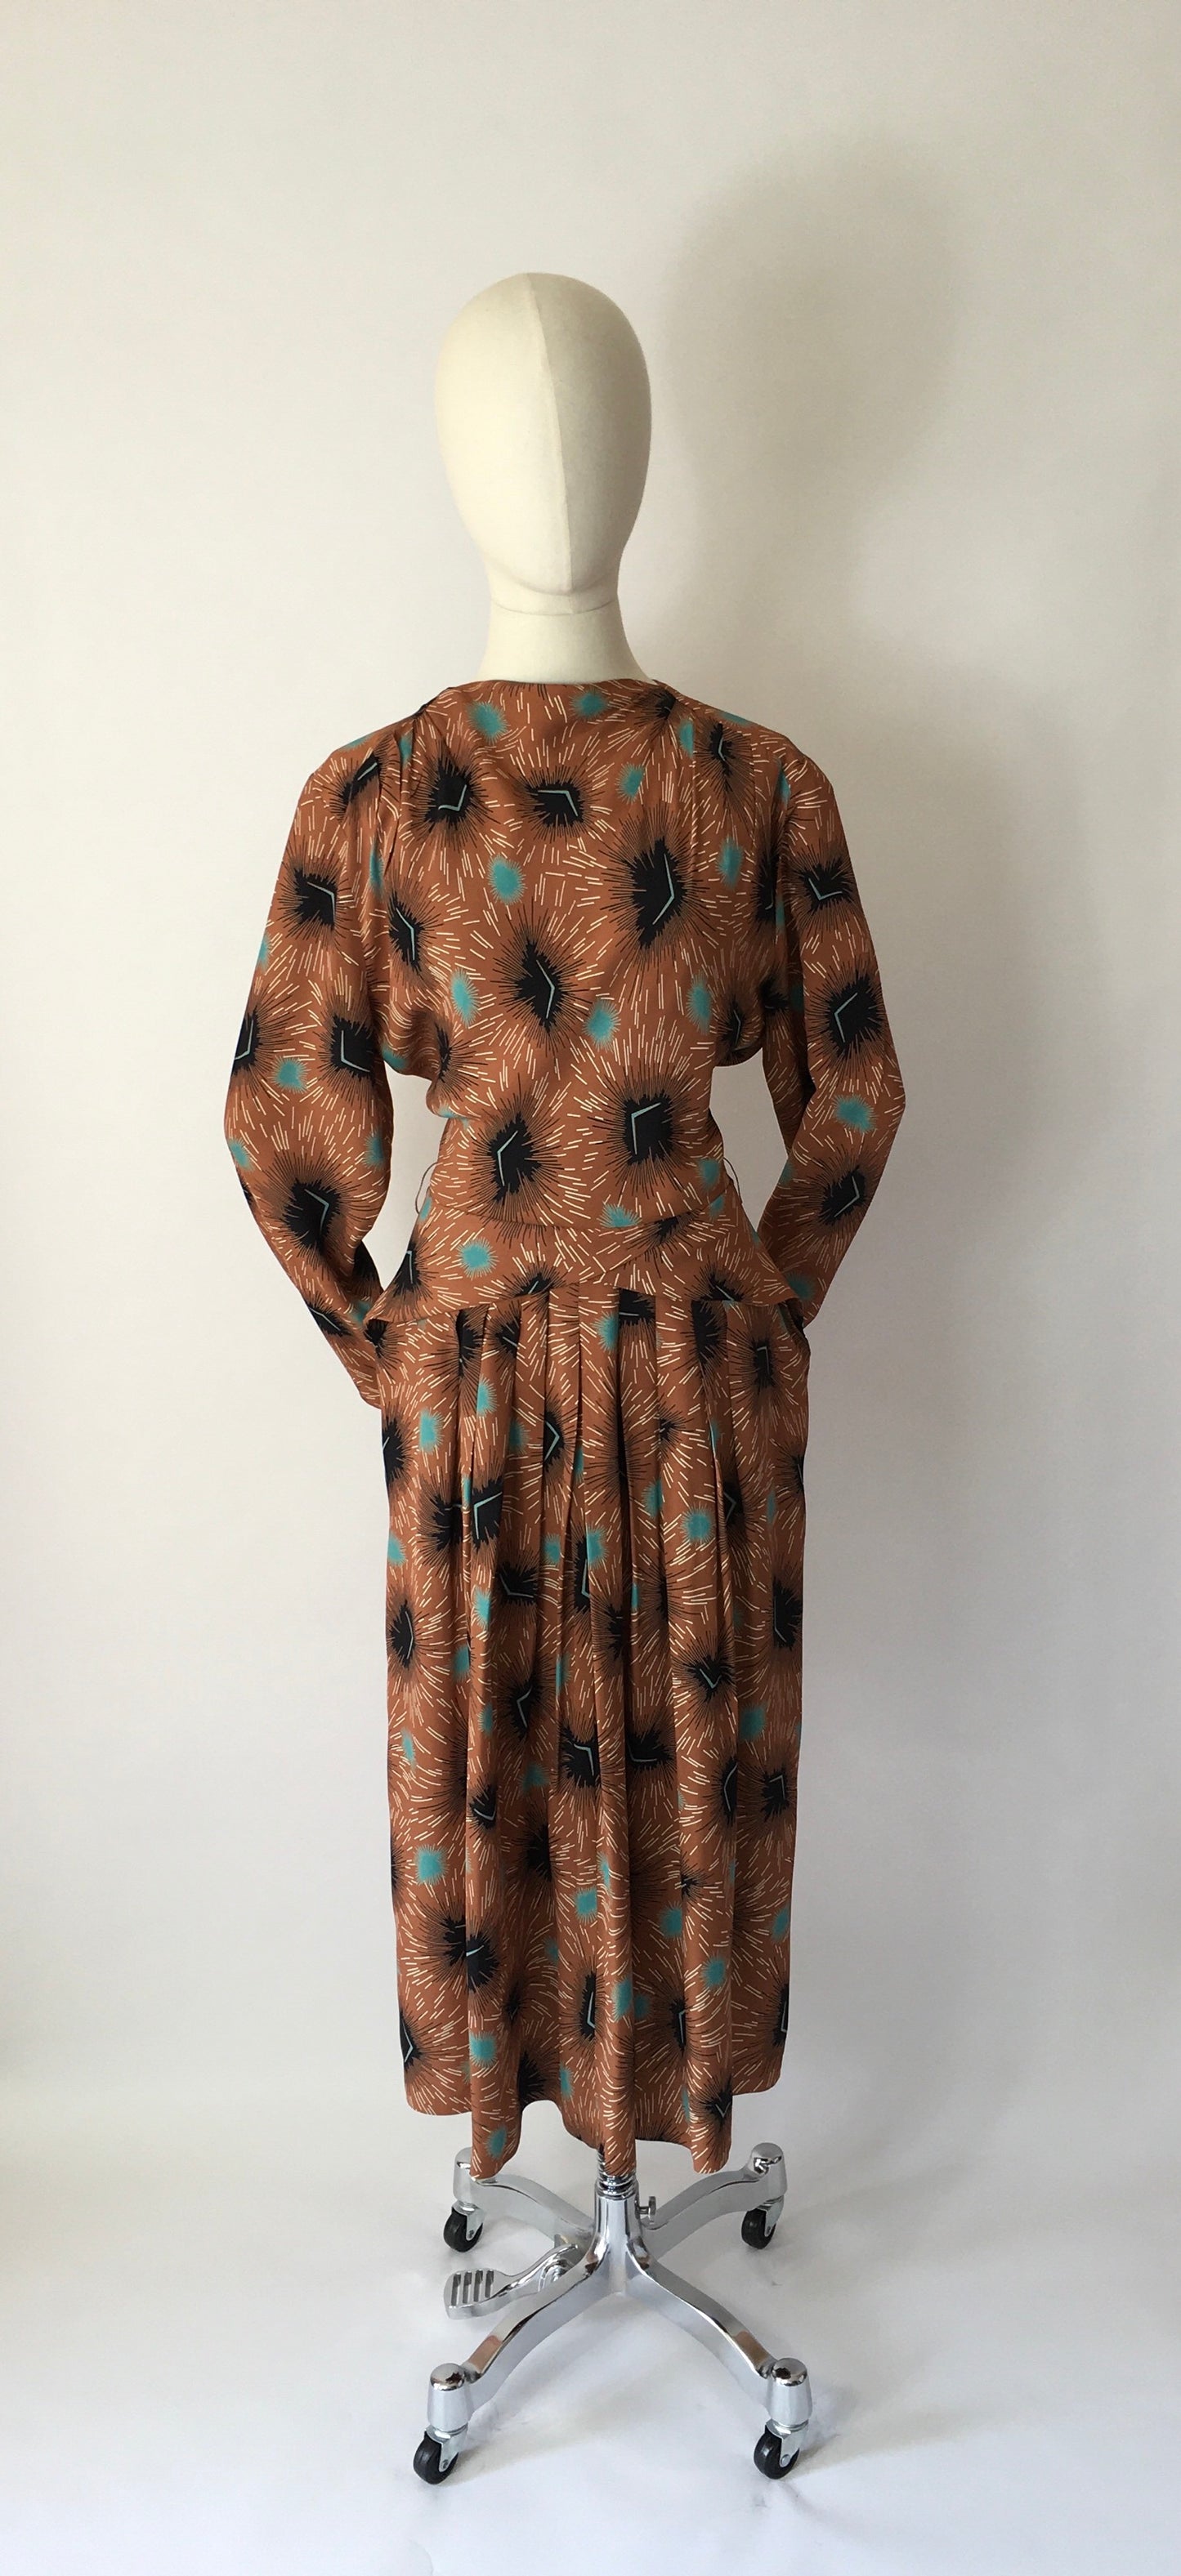 Original 1940’s Stunning Rayon Dress - Featuring a classic Silhouette and Beautiful Colour Pallet